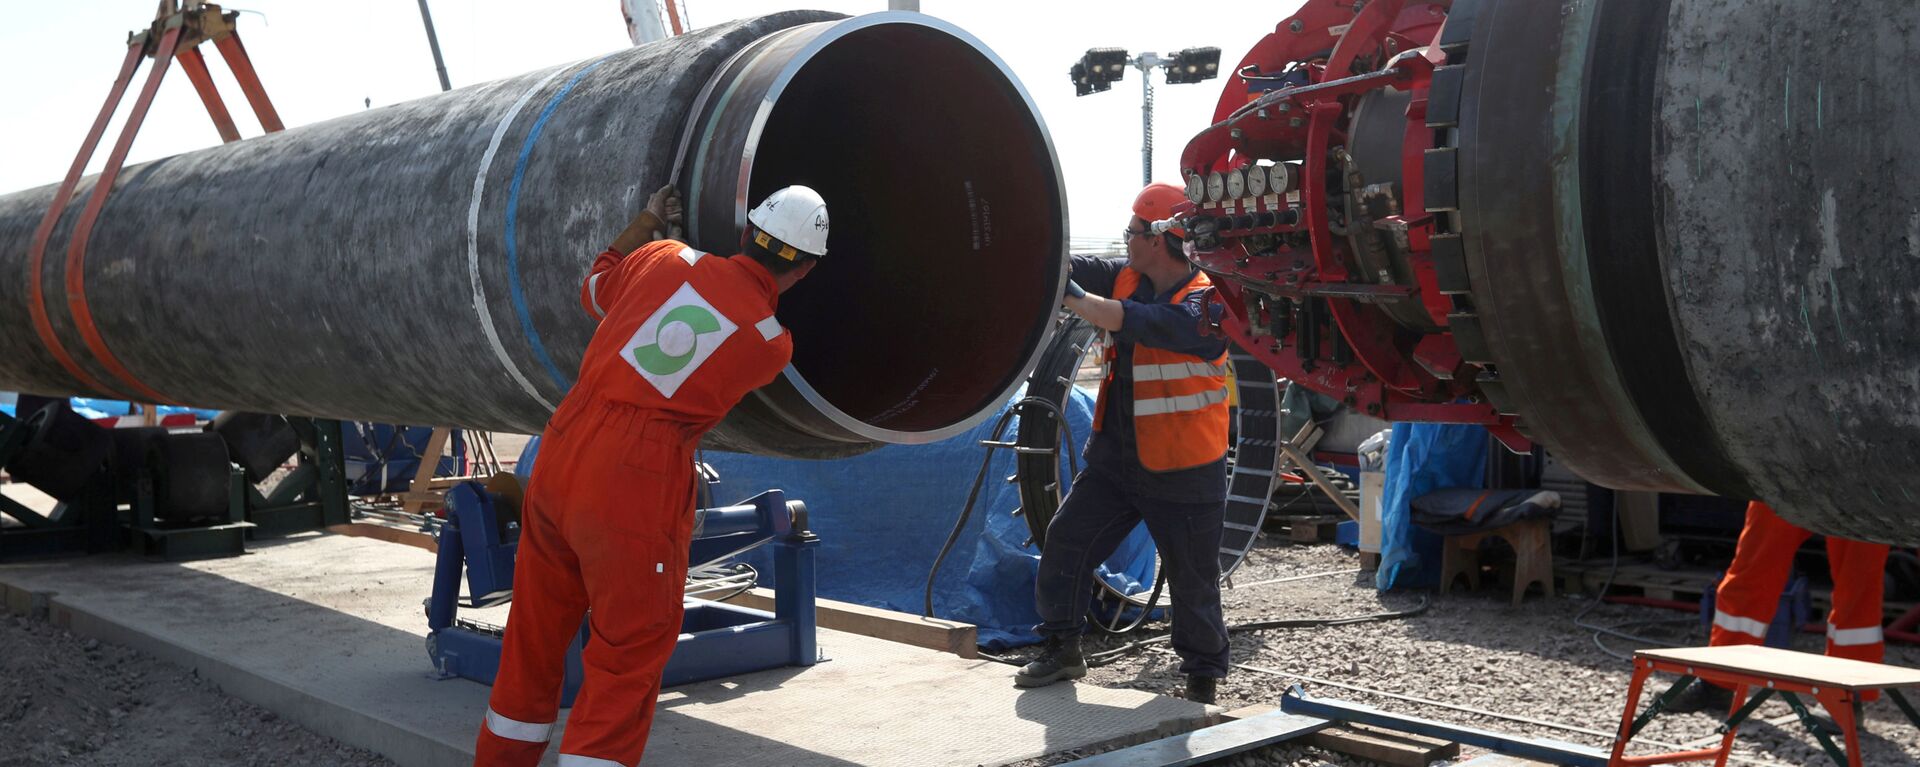 FILE PHOTO: FILE PHOTO: Workers are seen at the construction site of the Nord Stream 2 gas pipeline, near the town of Kingisepp, Leningrad region, Russia, June 5, 2019 - Sputnik International, 1920, 09.03.2021